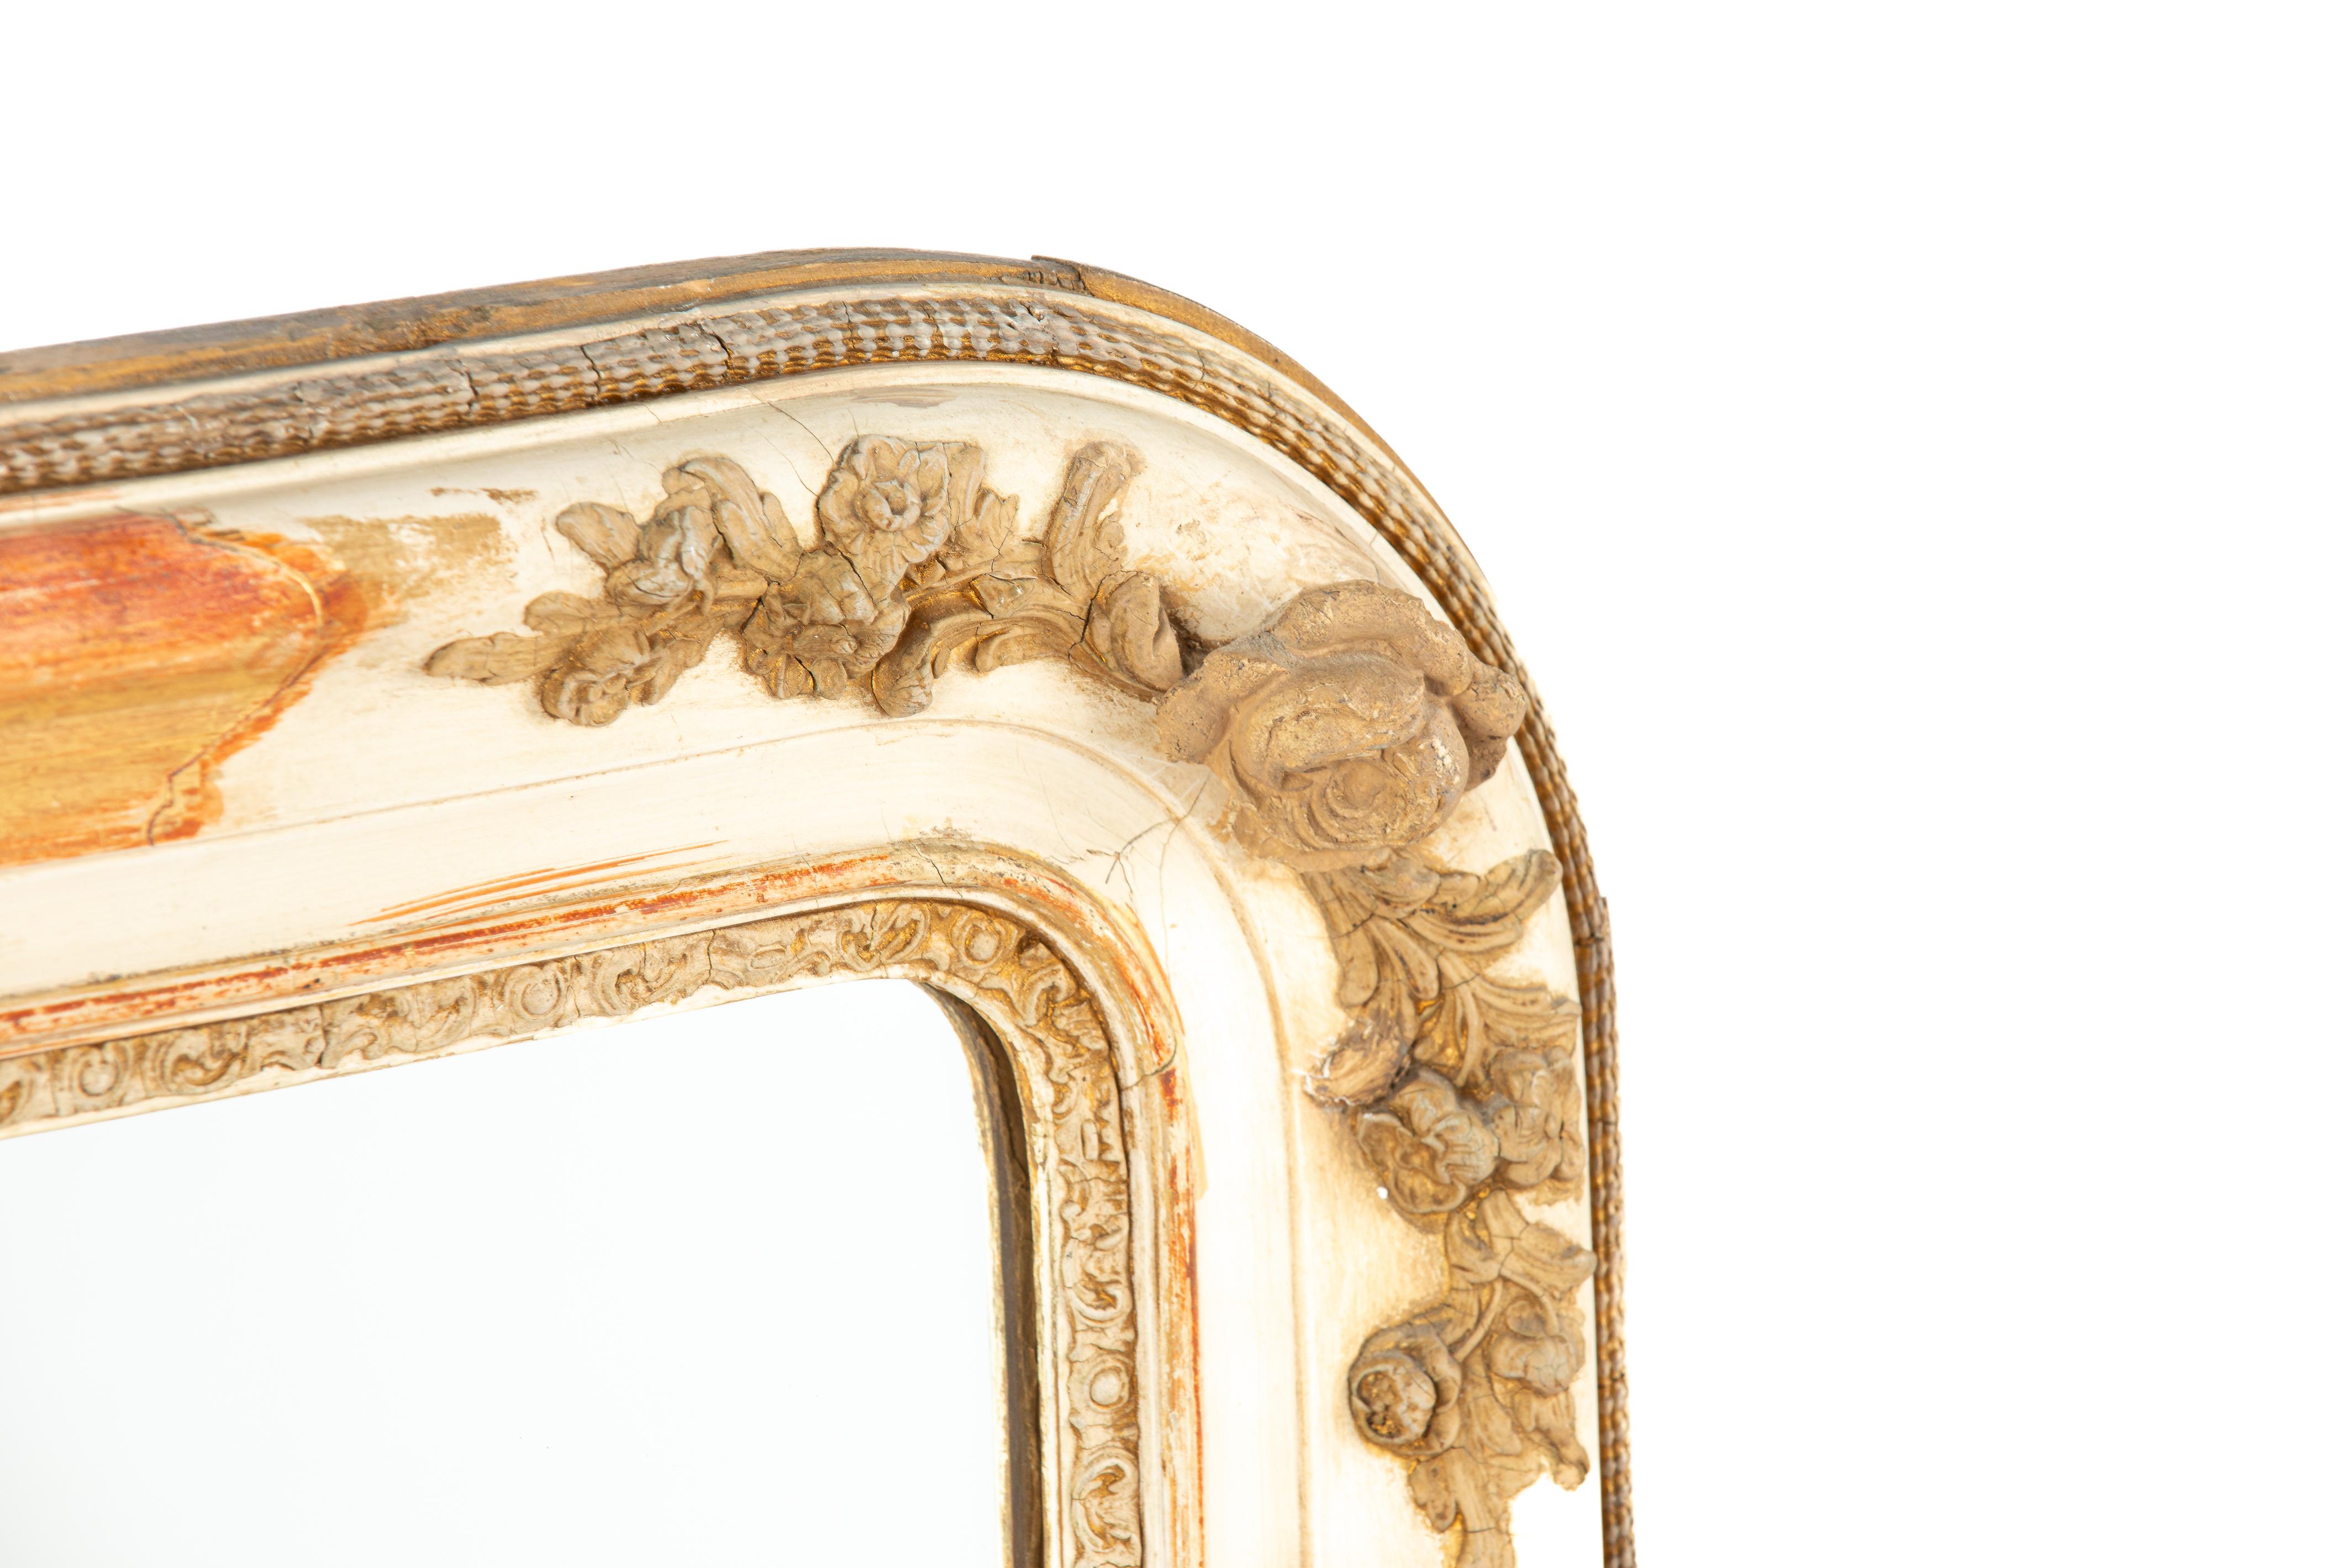  Antique mid 19th century faded gold gilt Frech Louis Philippe mantel mirror For Sale 1